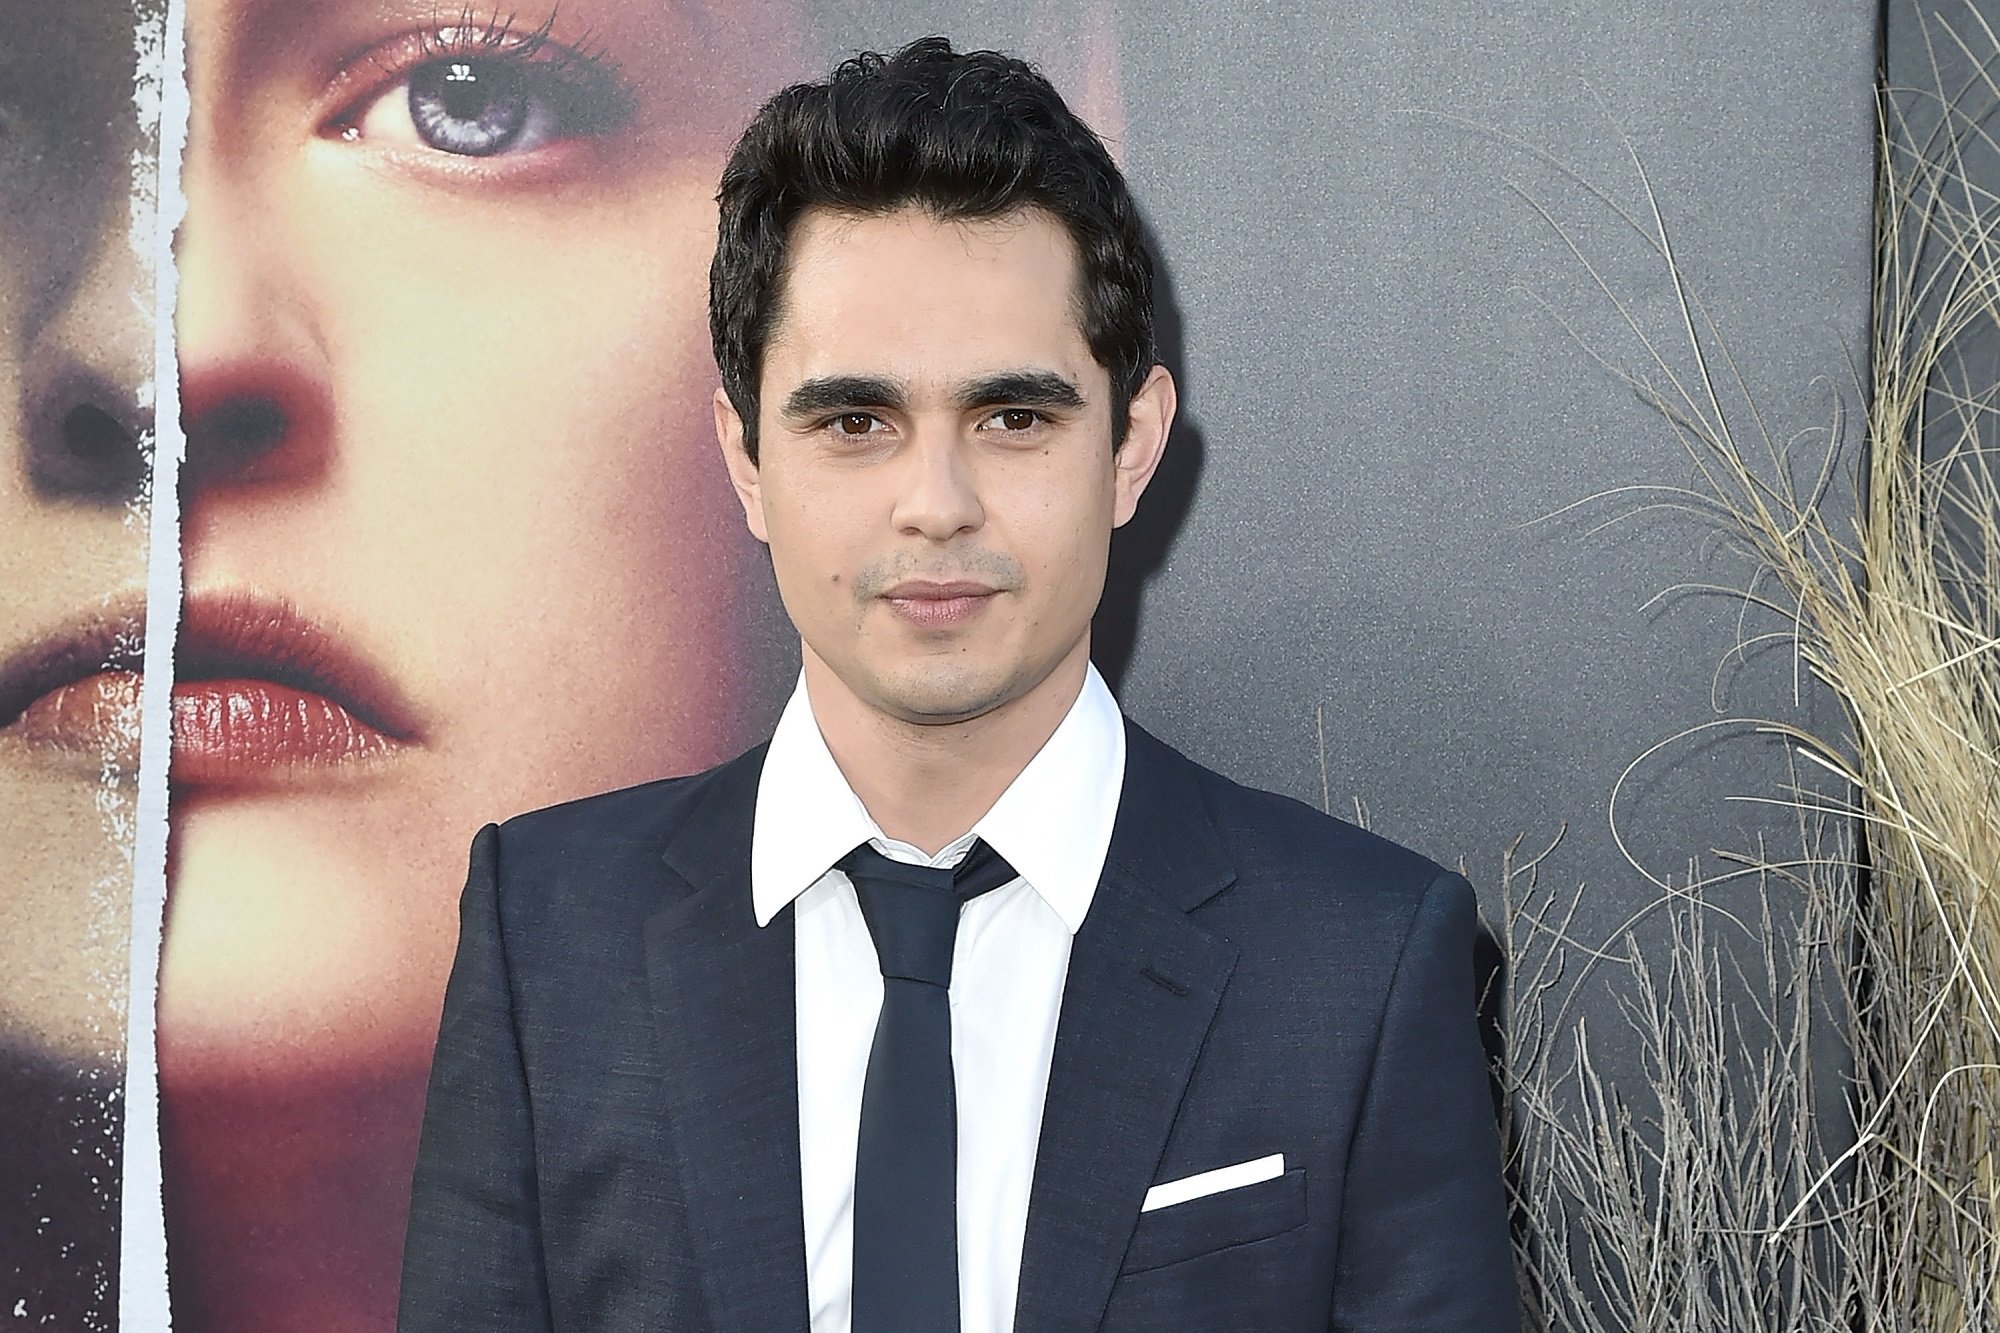 Actor Max Minghella at the premiere for Season 2 of Hulu's show 'The Handmaid's Tale'